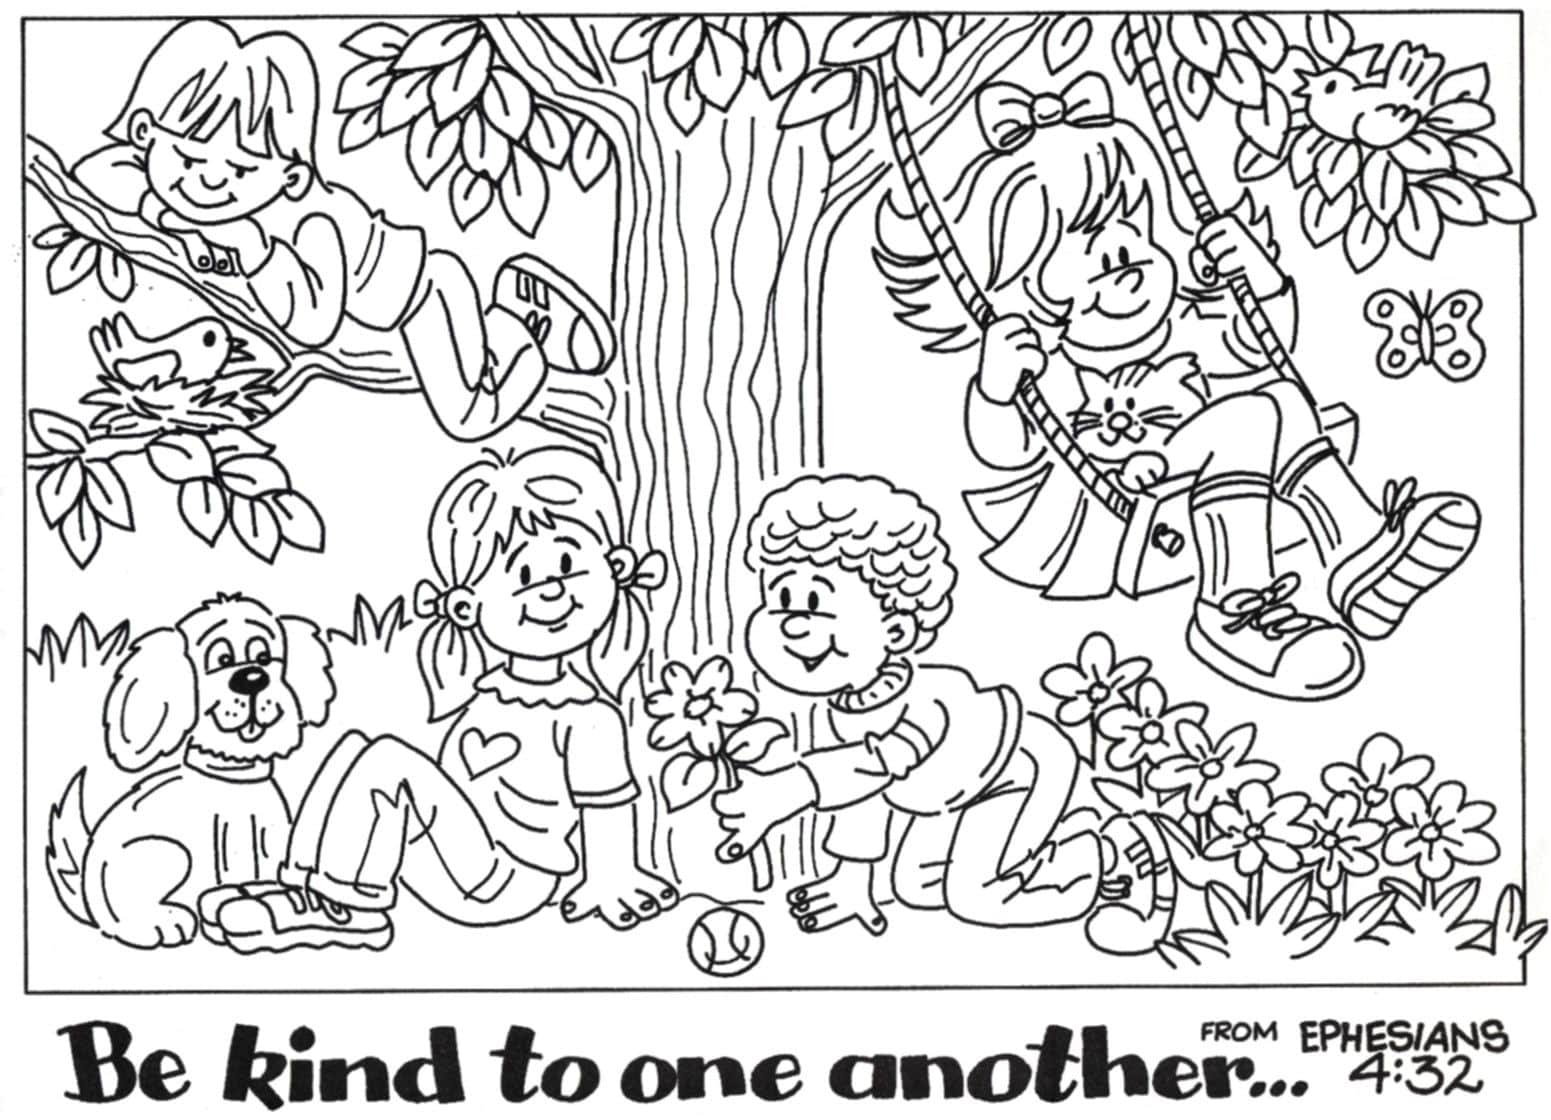 printable kindness coloring pages pdf |preschool kindness coloring pages | kindness week coloring pages